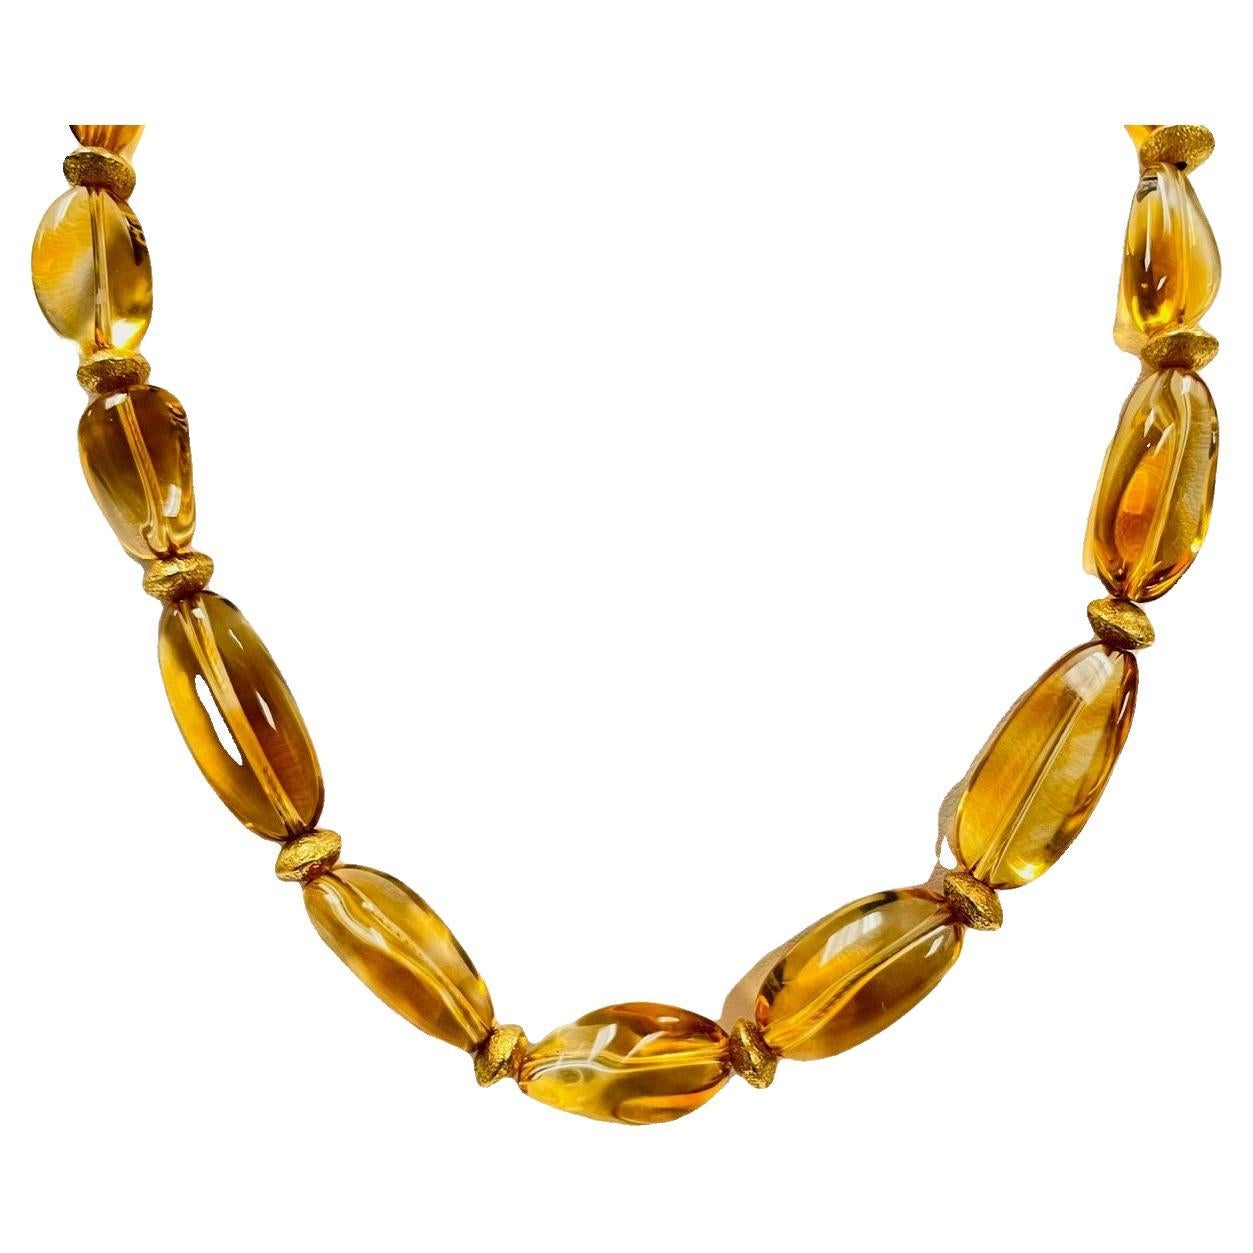 This pretty strand of  baroque citrine beads is one-of-a-kind.  It features 17 golden citrine beads in graduating sizes that display lovely warm, liquid sunshine color variations within each gemstone! The citrine has been hand strung with a liberal